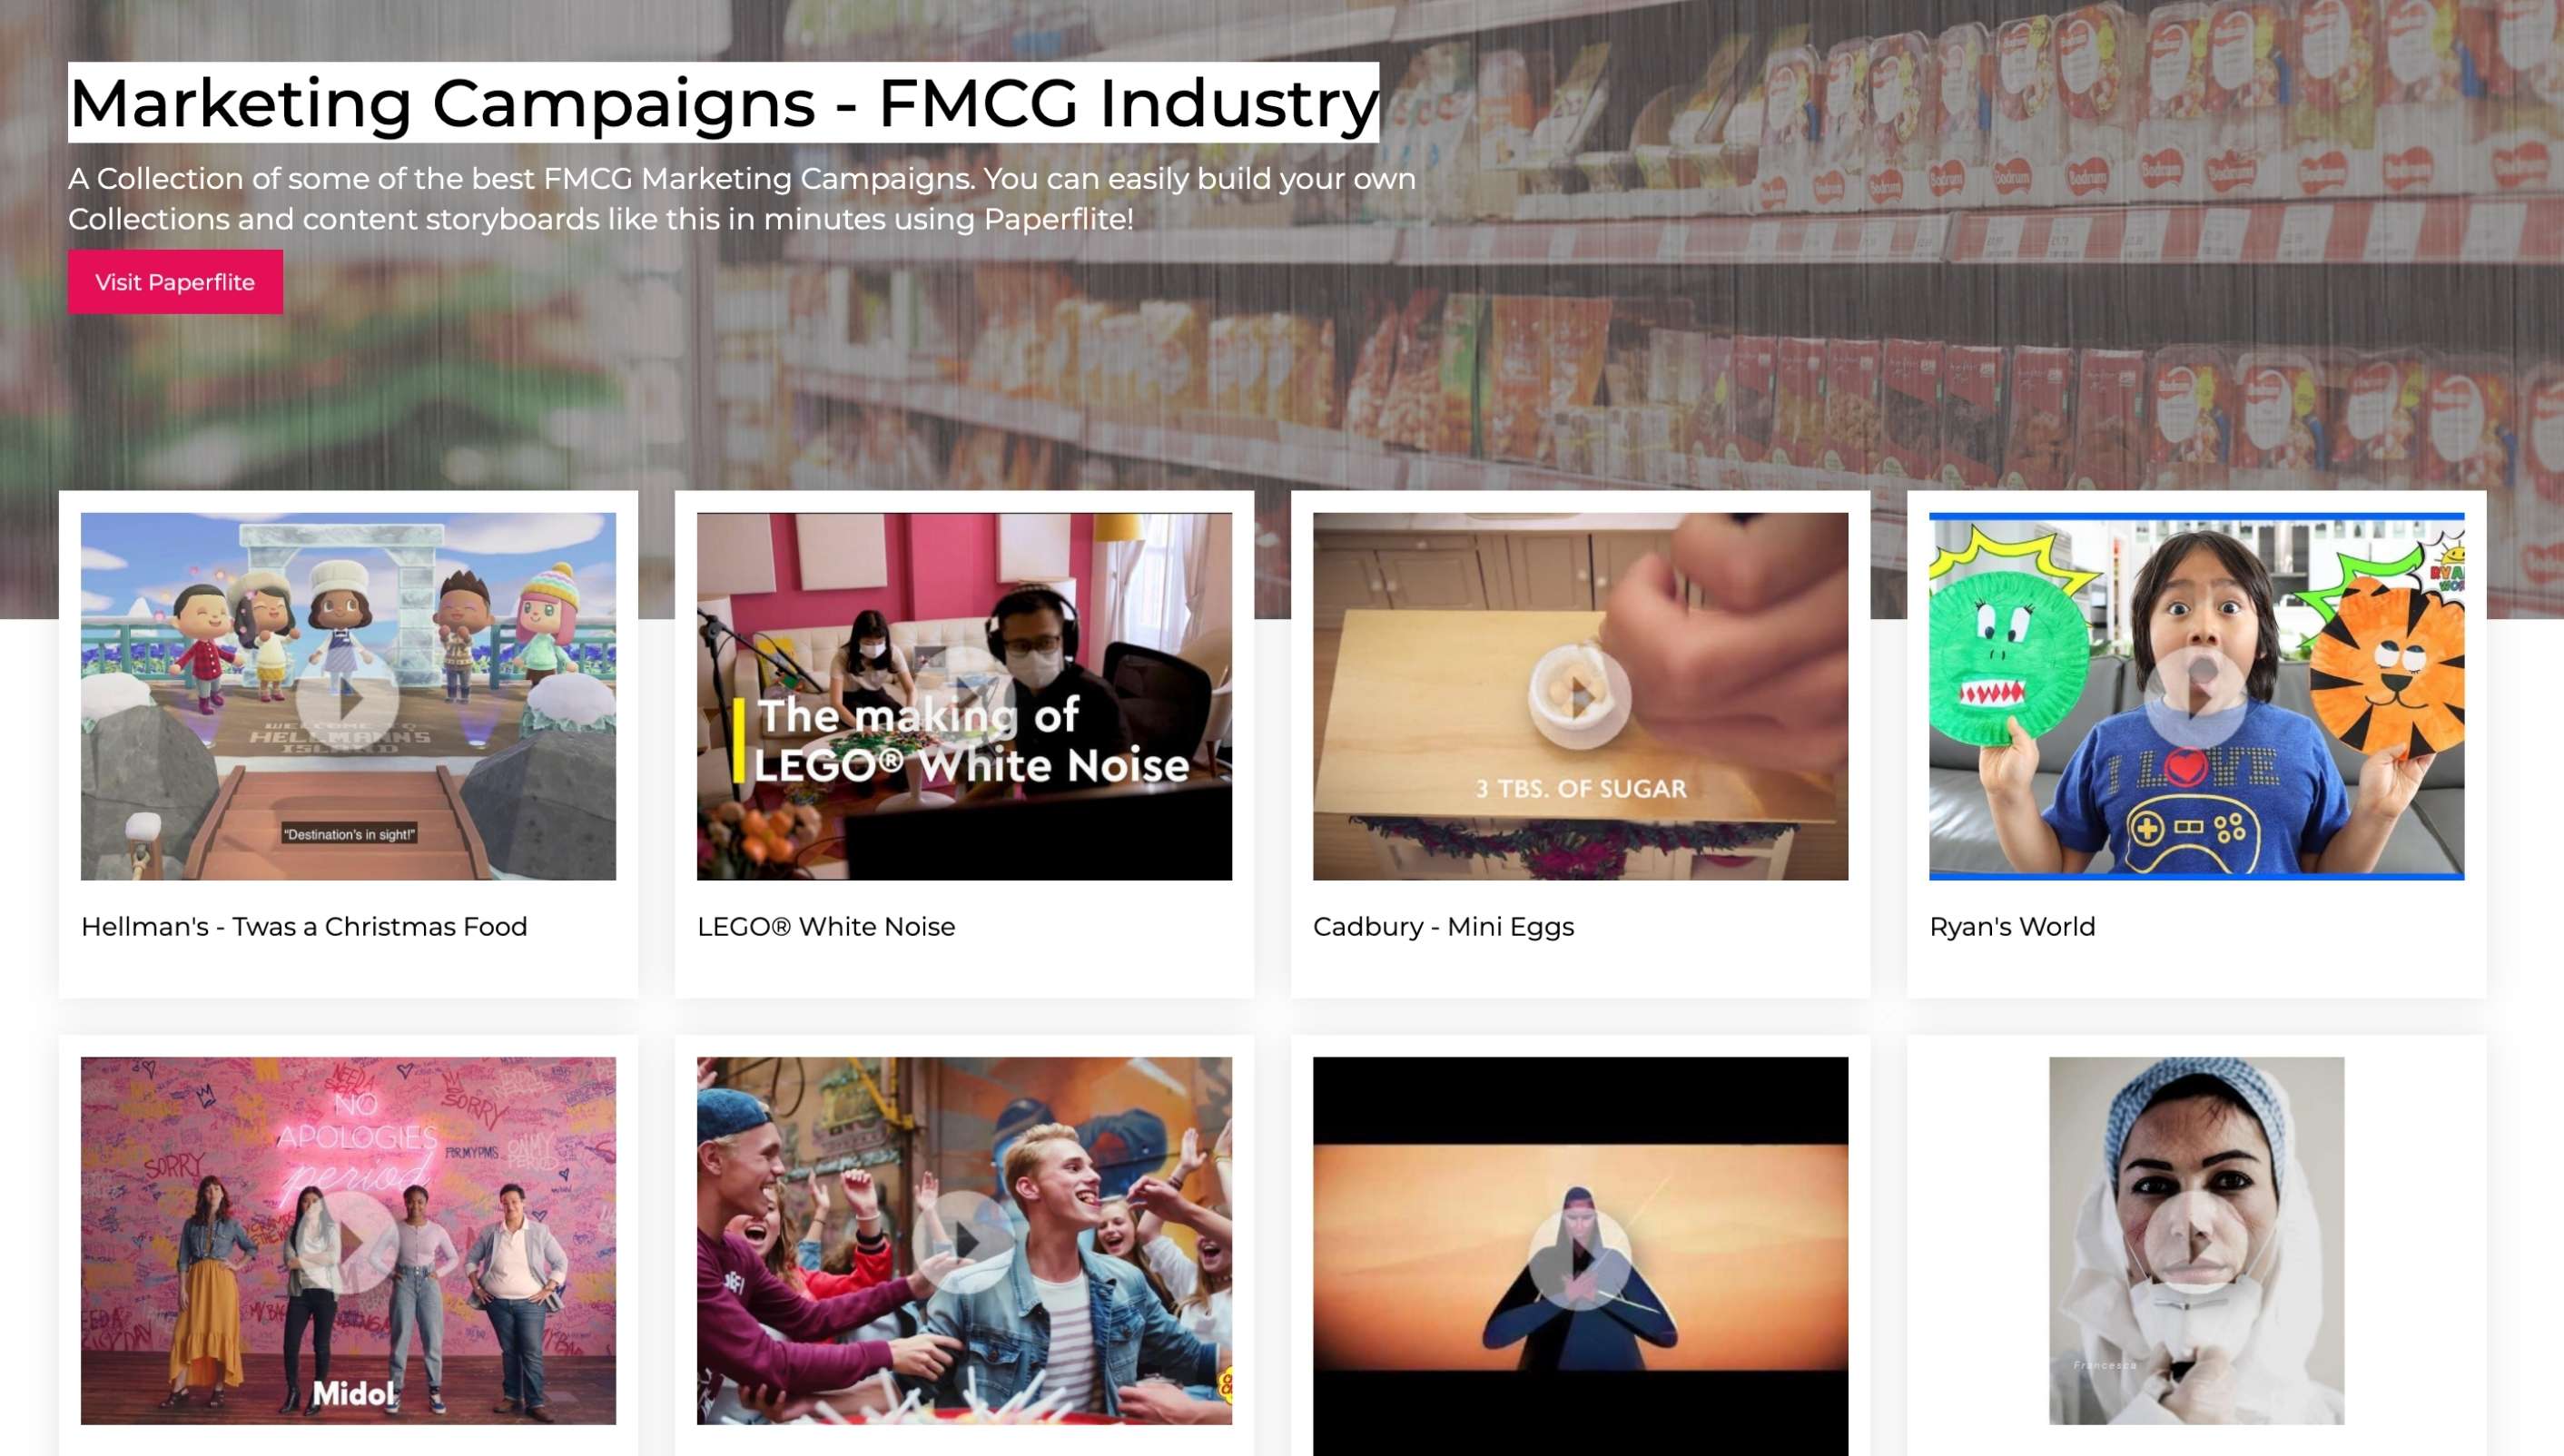 A Paperflite collection of Marketing Campaign examples in the FMCG industry